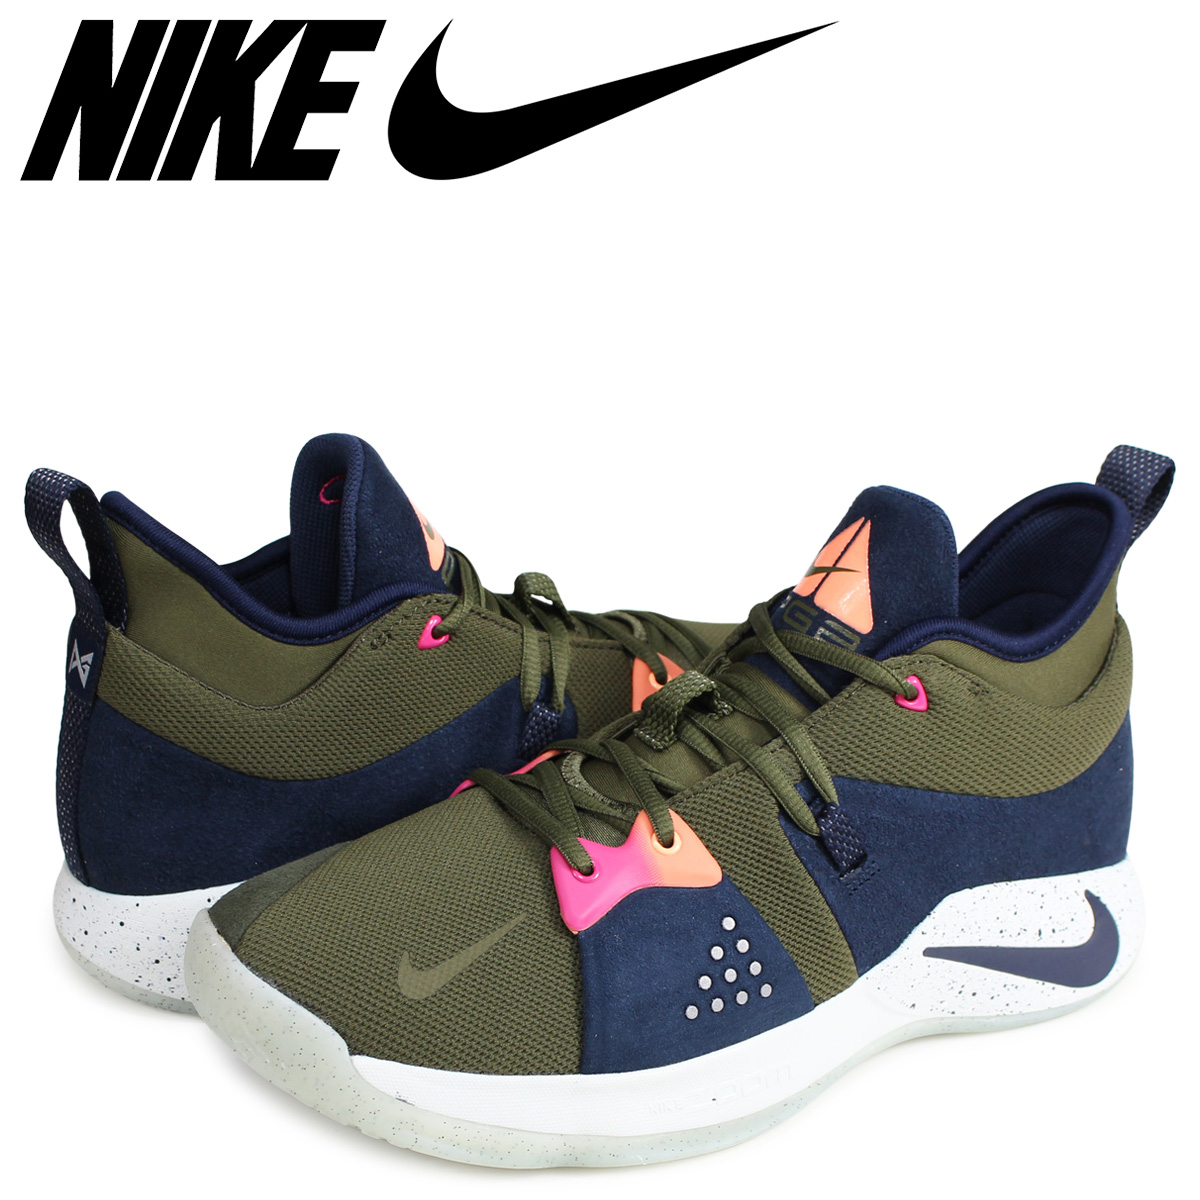 nike pg 2 acg Kevin Durant shoes on sale